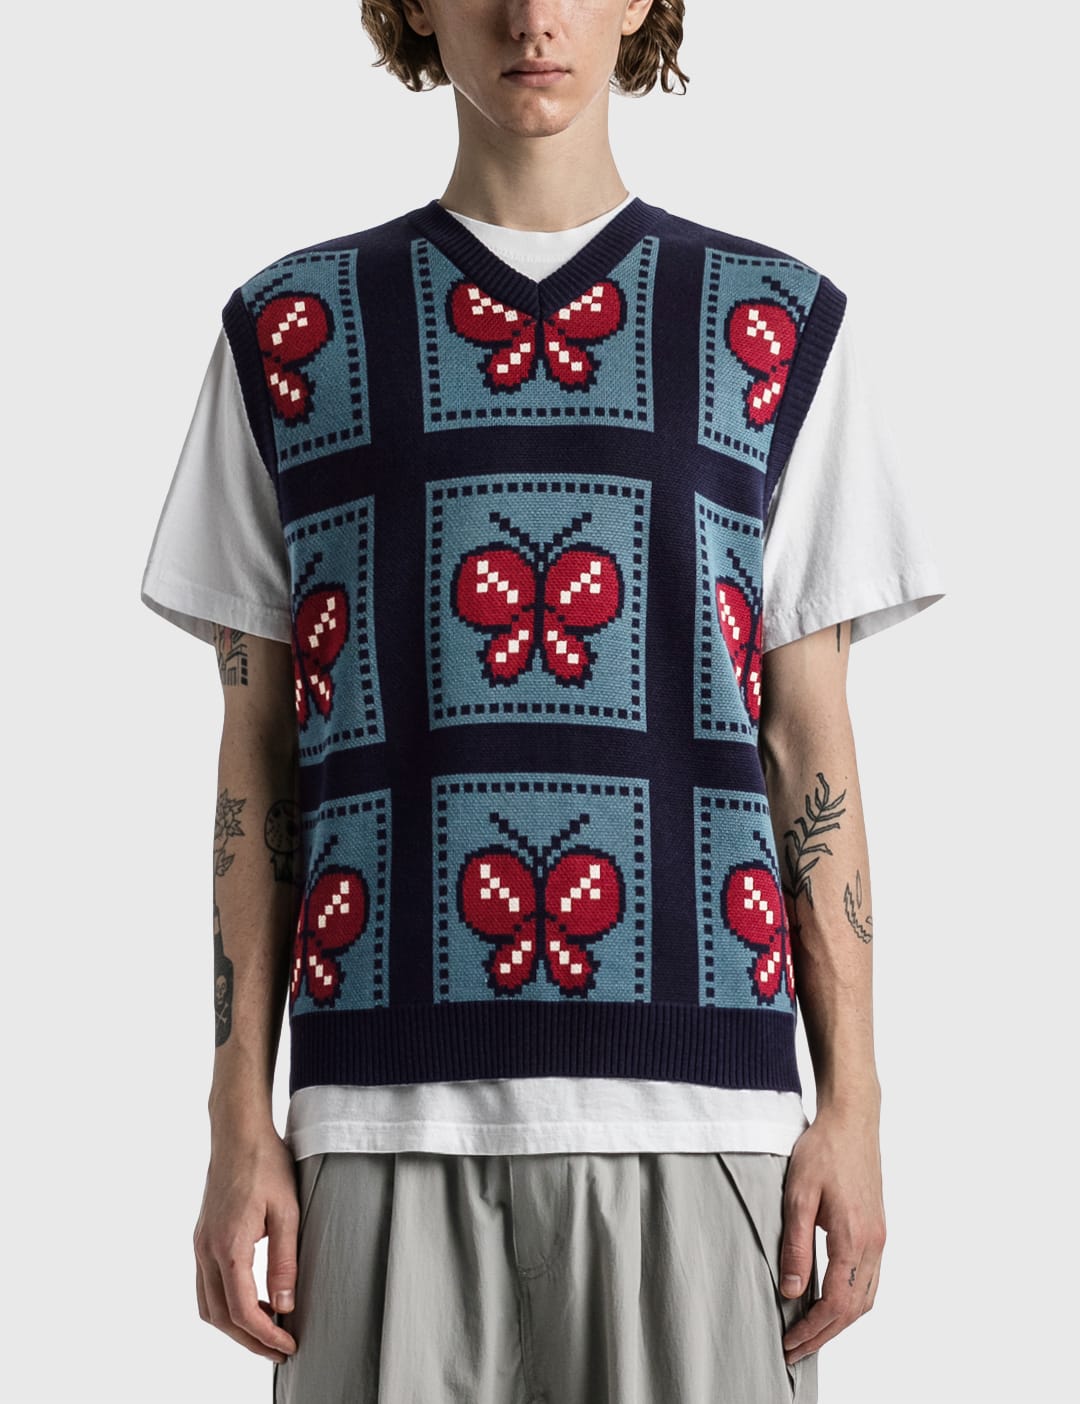 Awake NY - Butterfly Sweater Vest | HBX - Globally Curated Fashion 